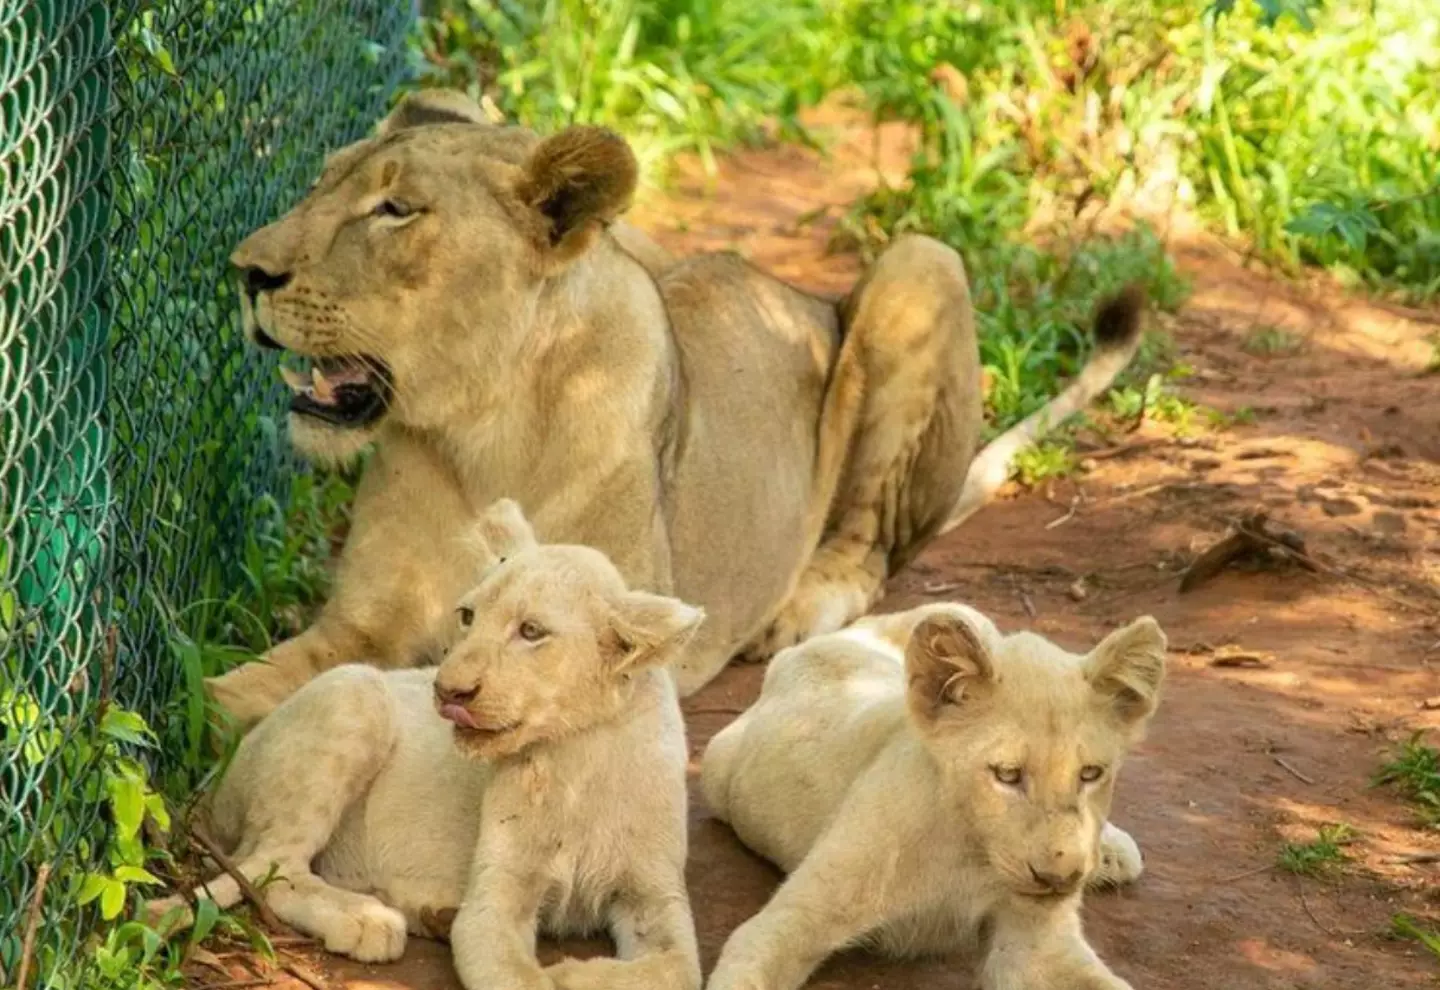 The zoo is home to a lion, lioness, and two cubs.